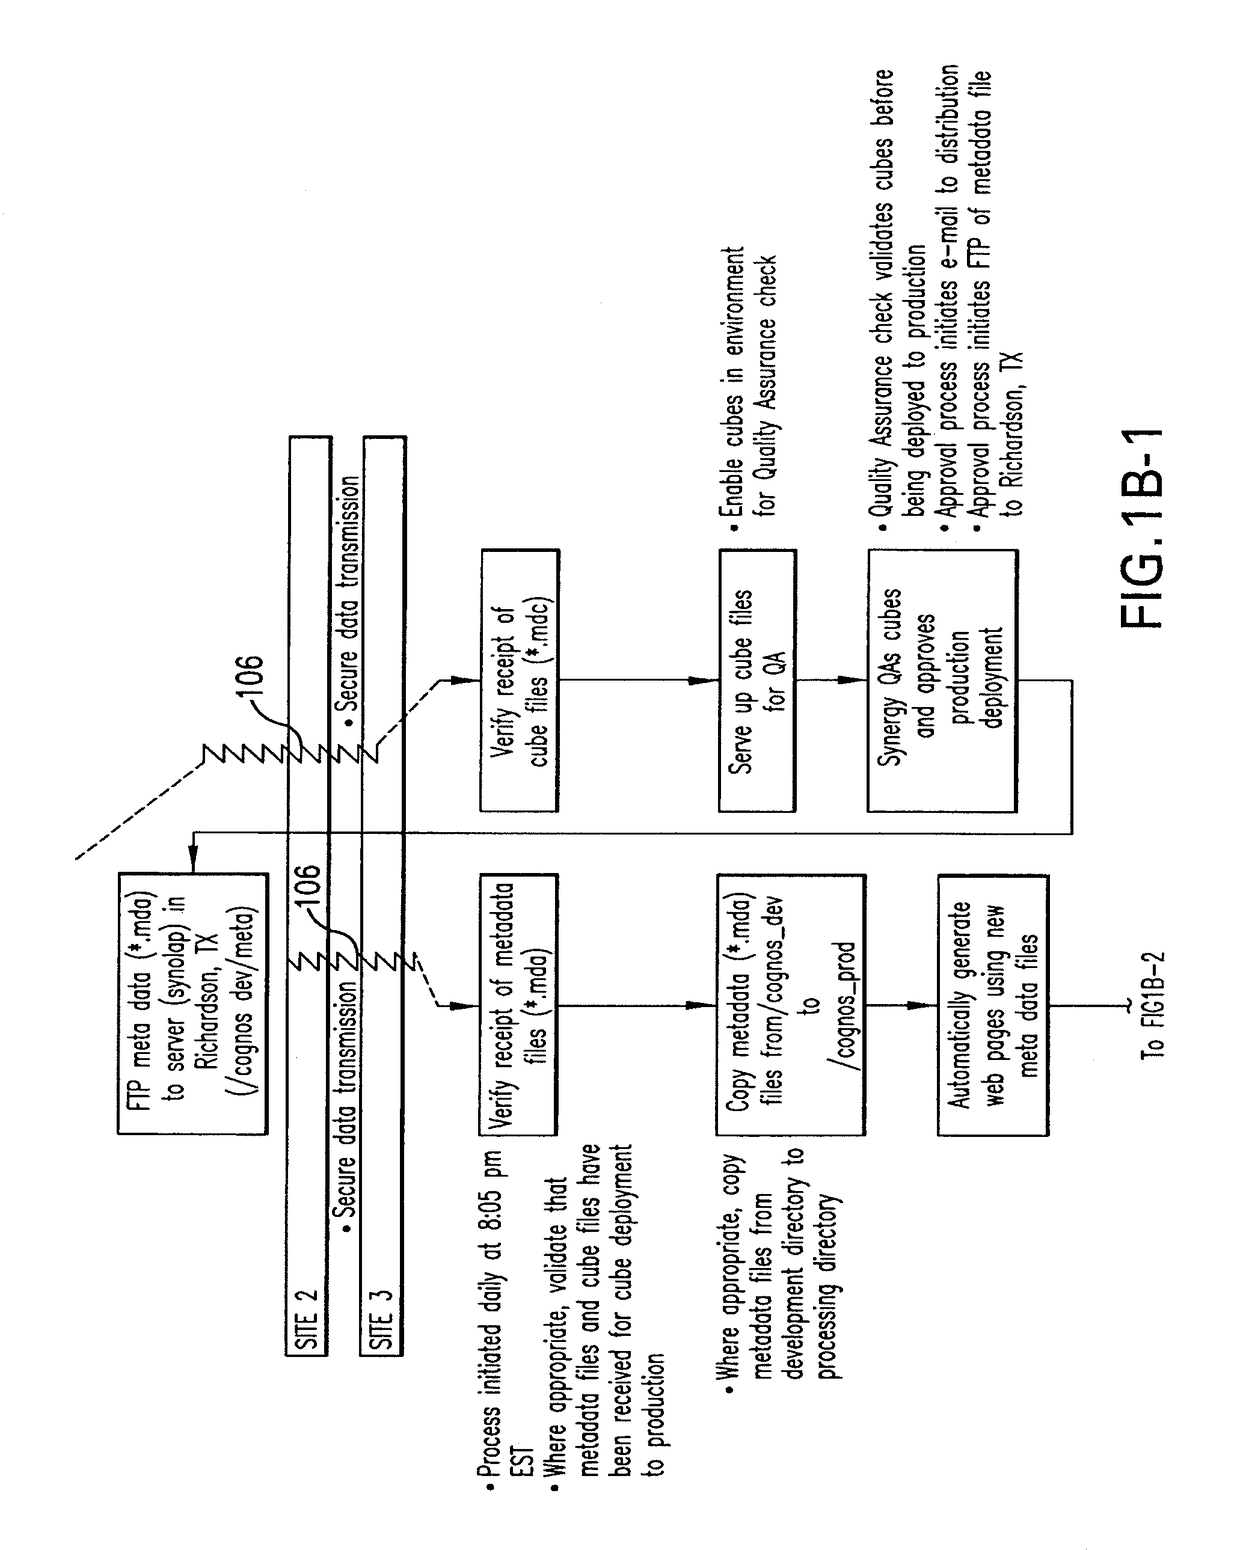 System and method for analyzing de-identified health care data